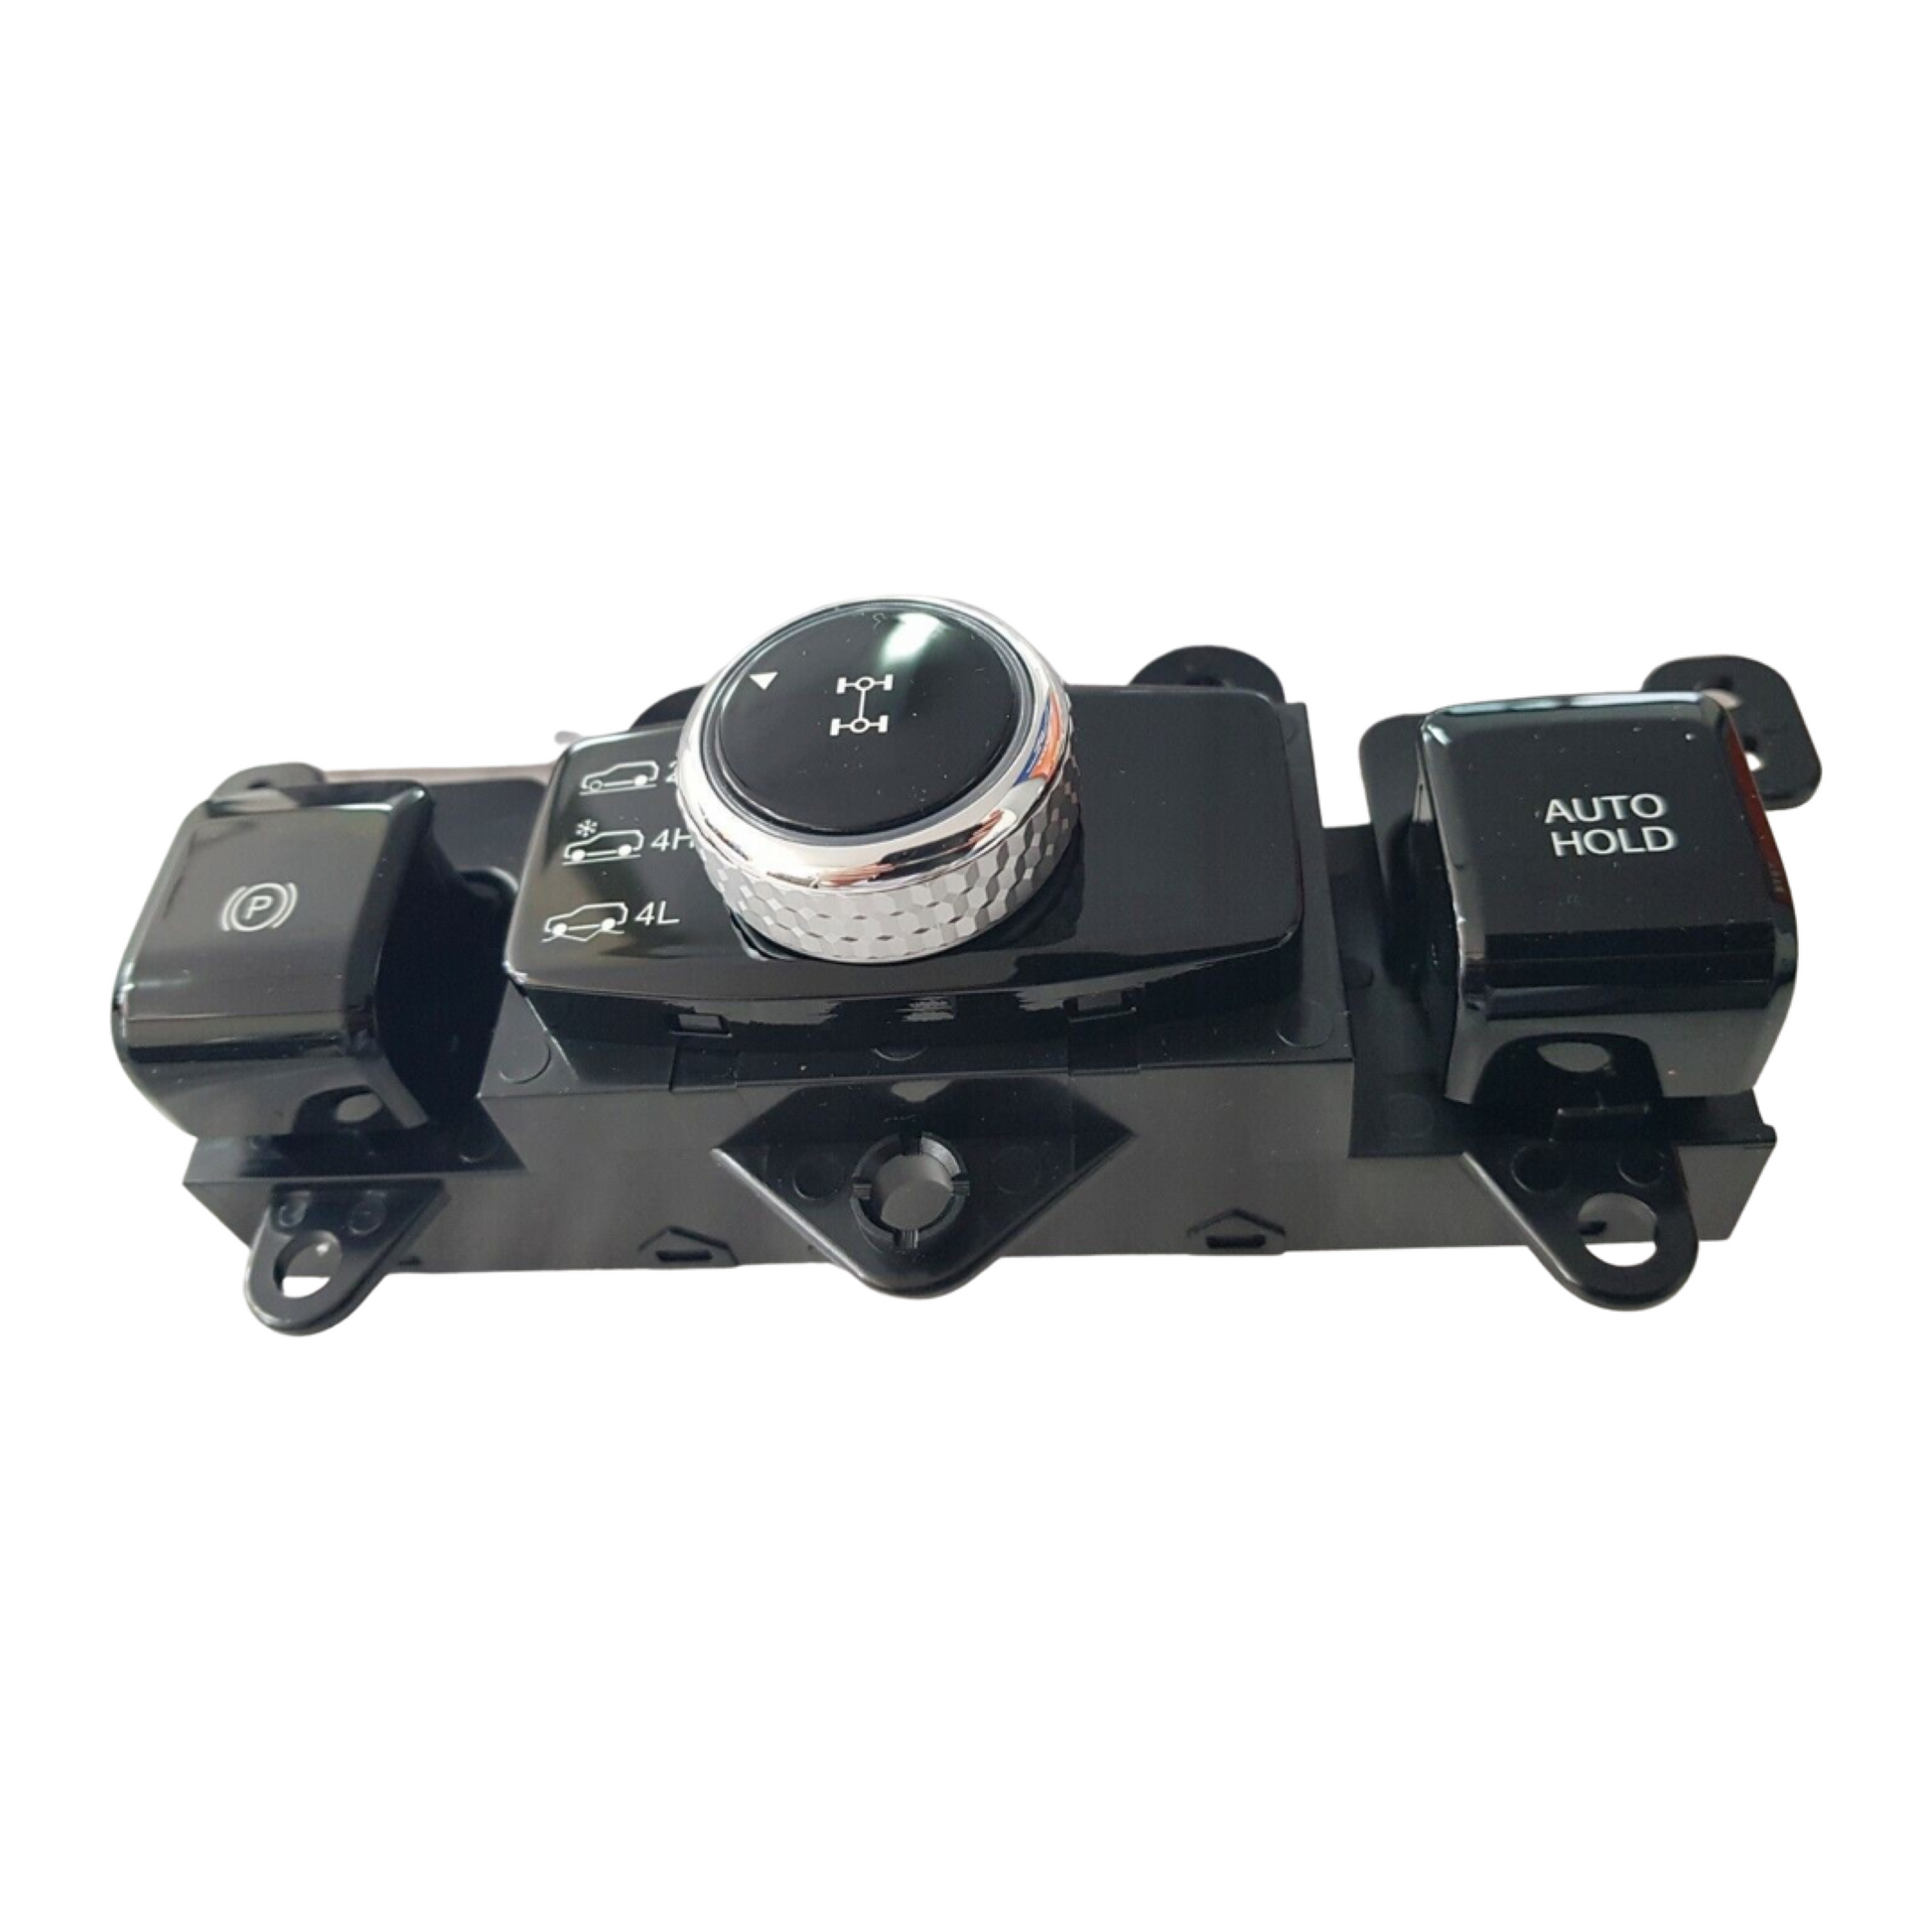 Genuine SsangYong Centre Console Switch for Rexton (Pre Facelift).